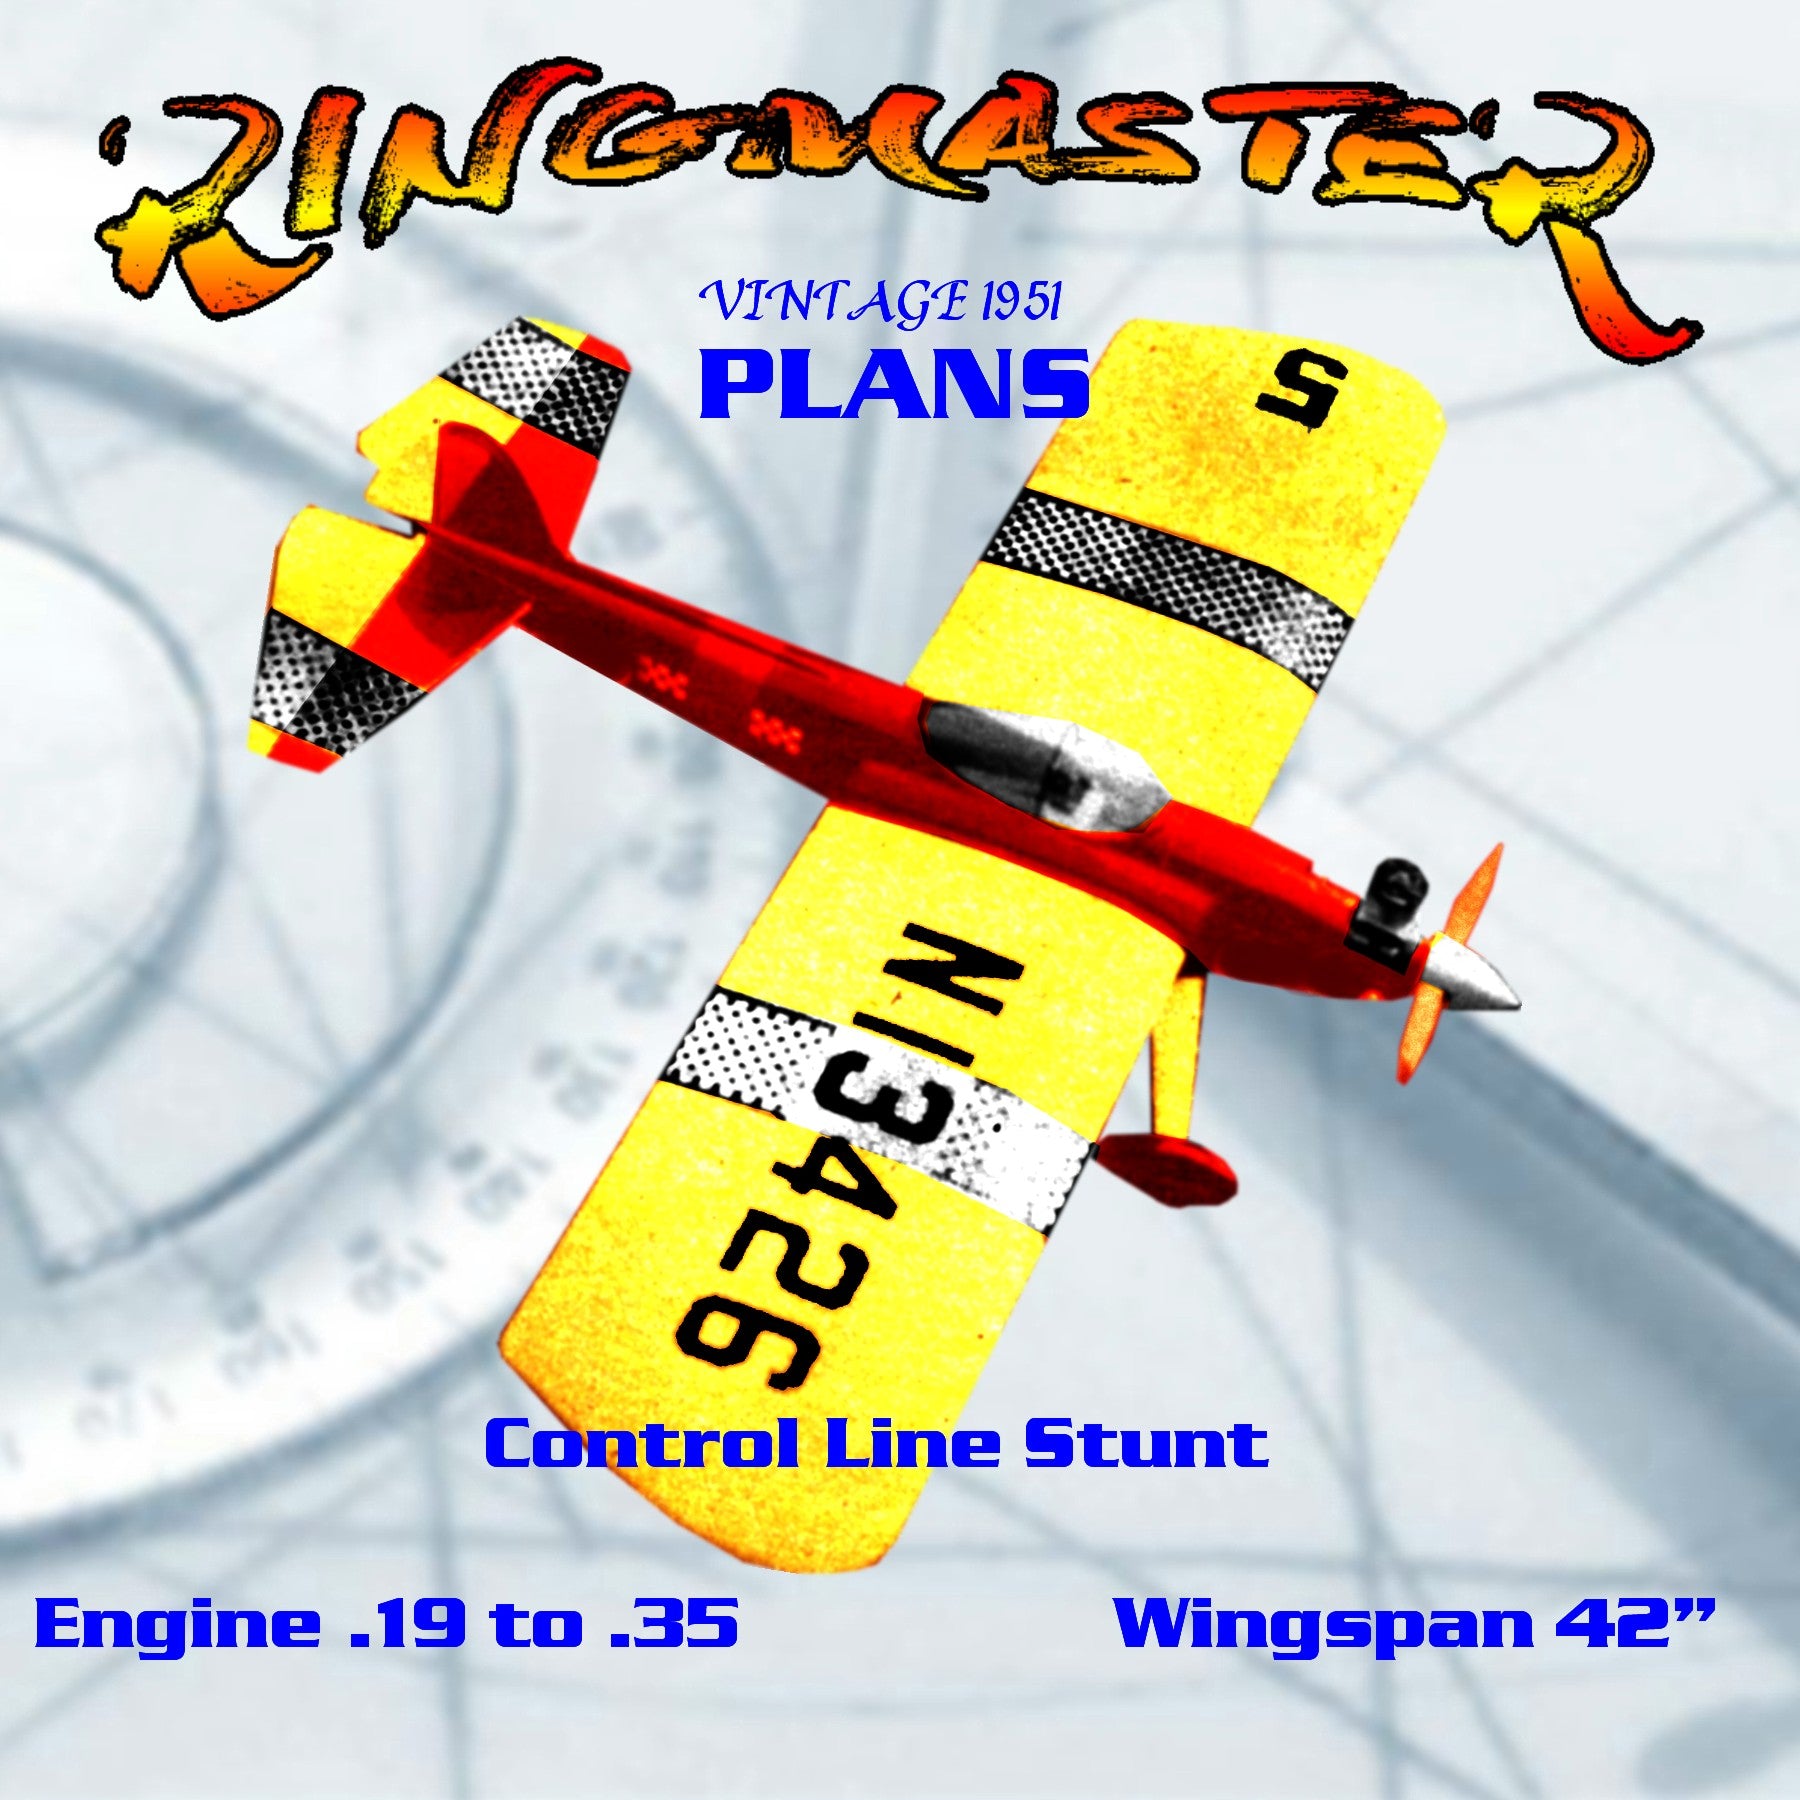 full size printed plan vintage 1951 control line stunt  .19 to .35 ringmaster  tried and proven stunt ship